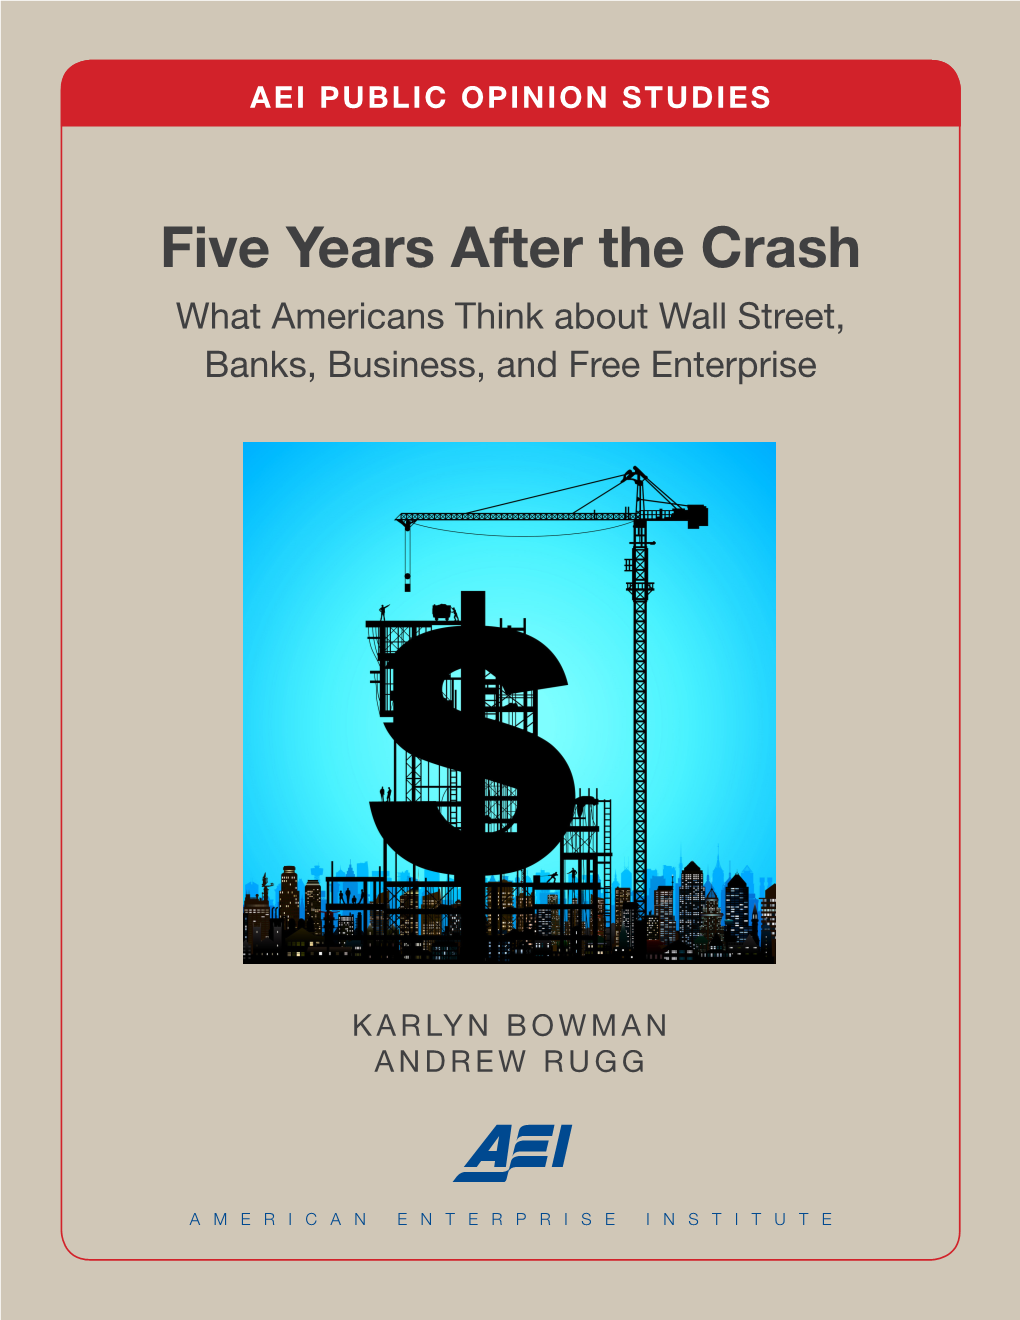 Five Years After the Crash: What Americans Think About Wall Street, Banks, Business, and Free Enterprise